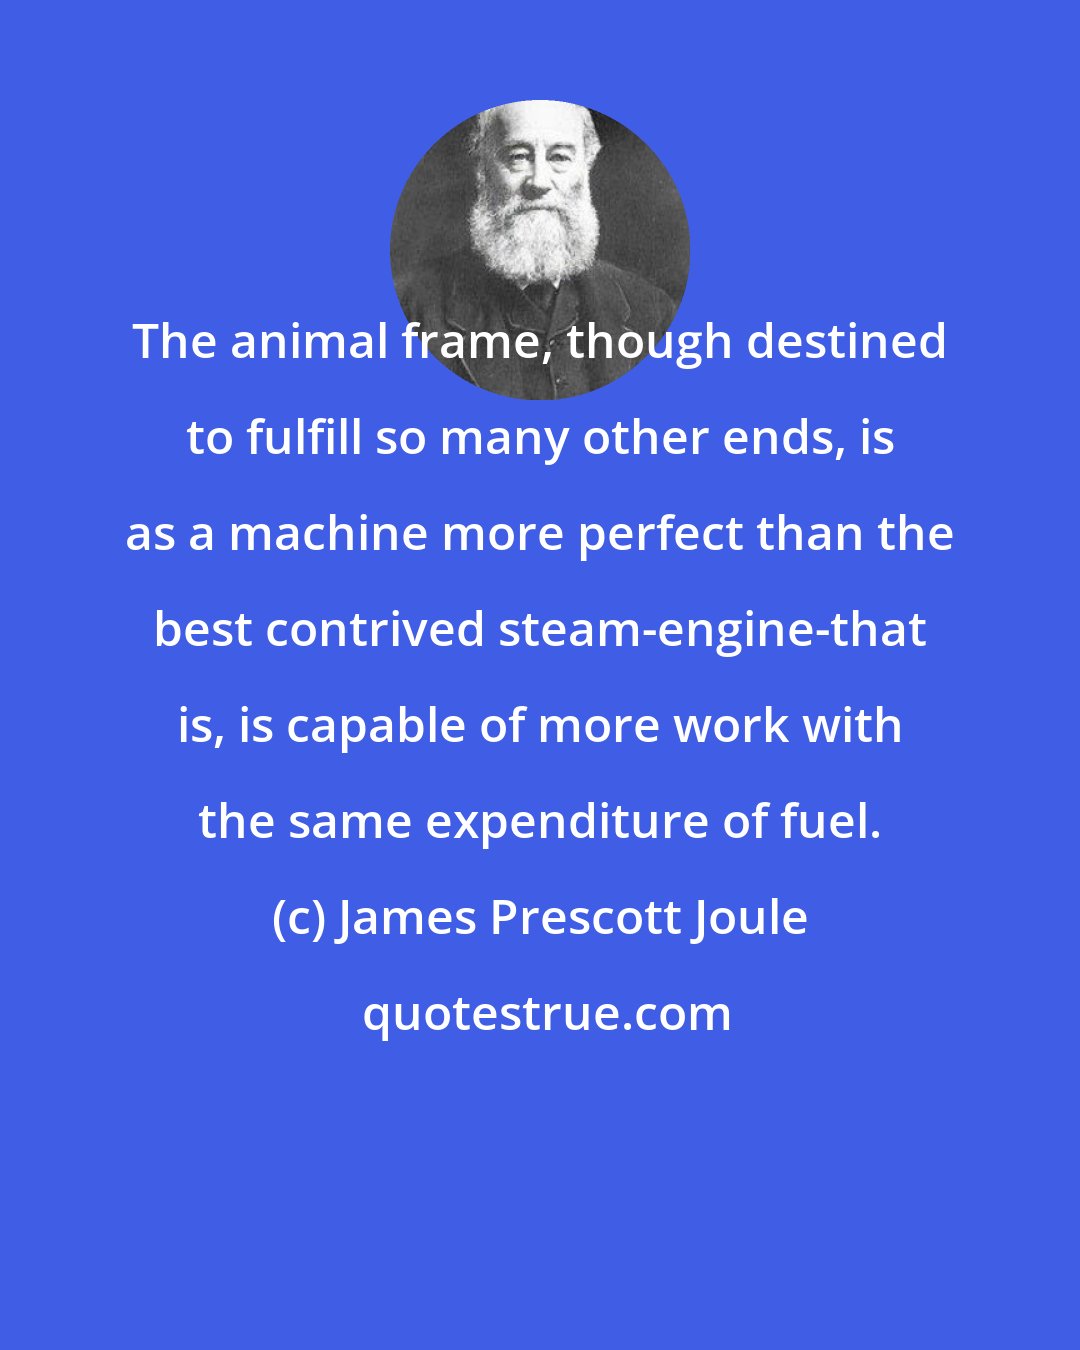 James Prescott Joule: The animal frame, though destined to fulfill so many other ends, is as a machine more perfect than the best contrived steam-engine-that is, is capable of more work with the same expenditure of fuel.